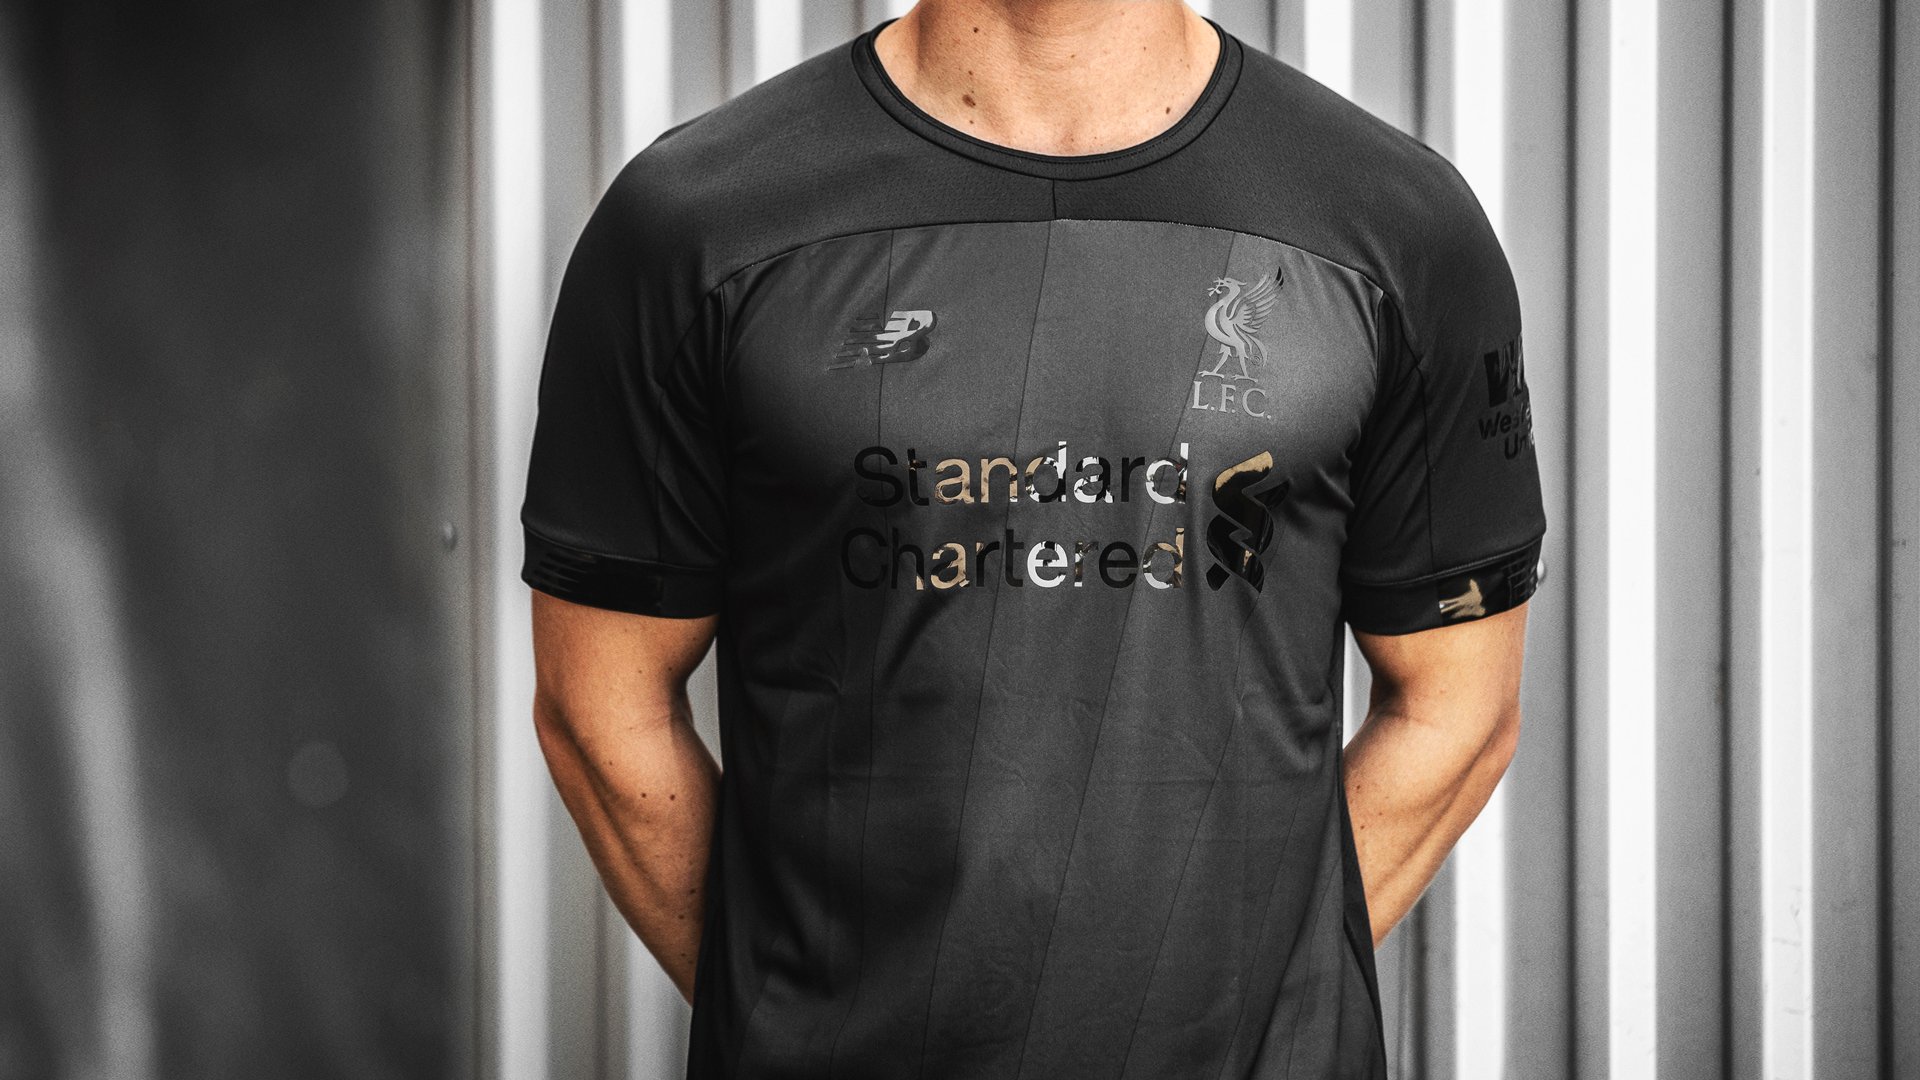 Liverpool are back in black | Check out 